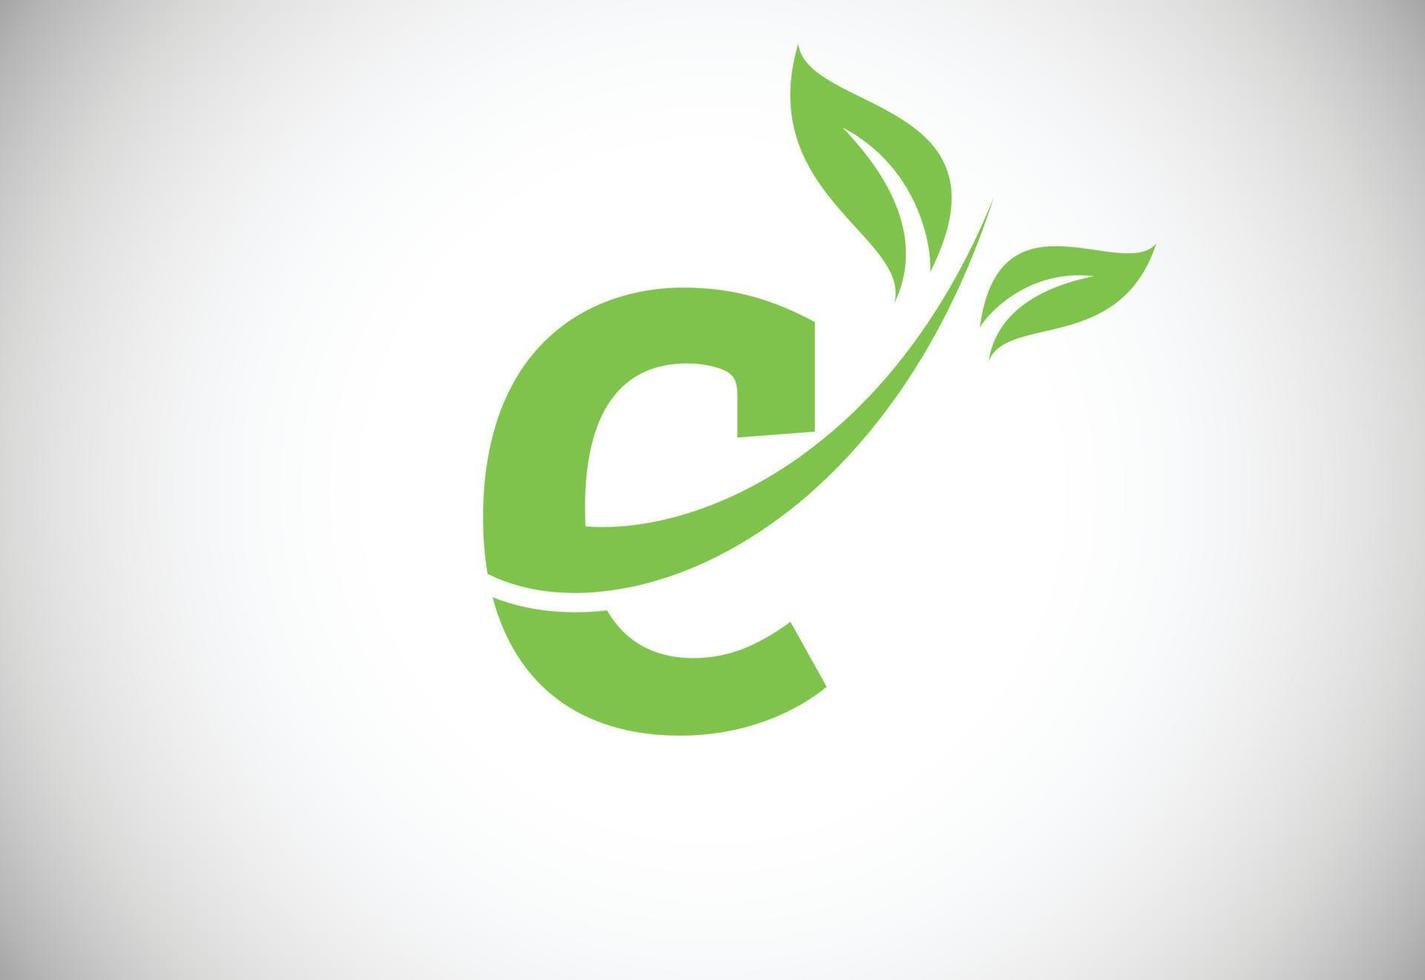 Initial letter C and leaf logo. Eco-friendly logo concept. Modern vector logo for ecological business and company identity